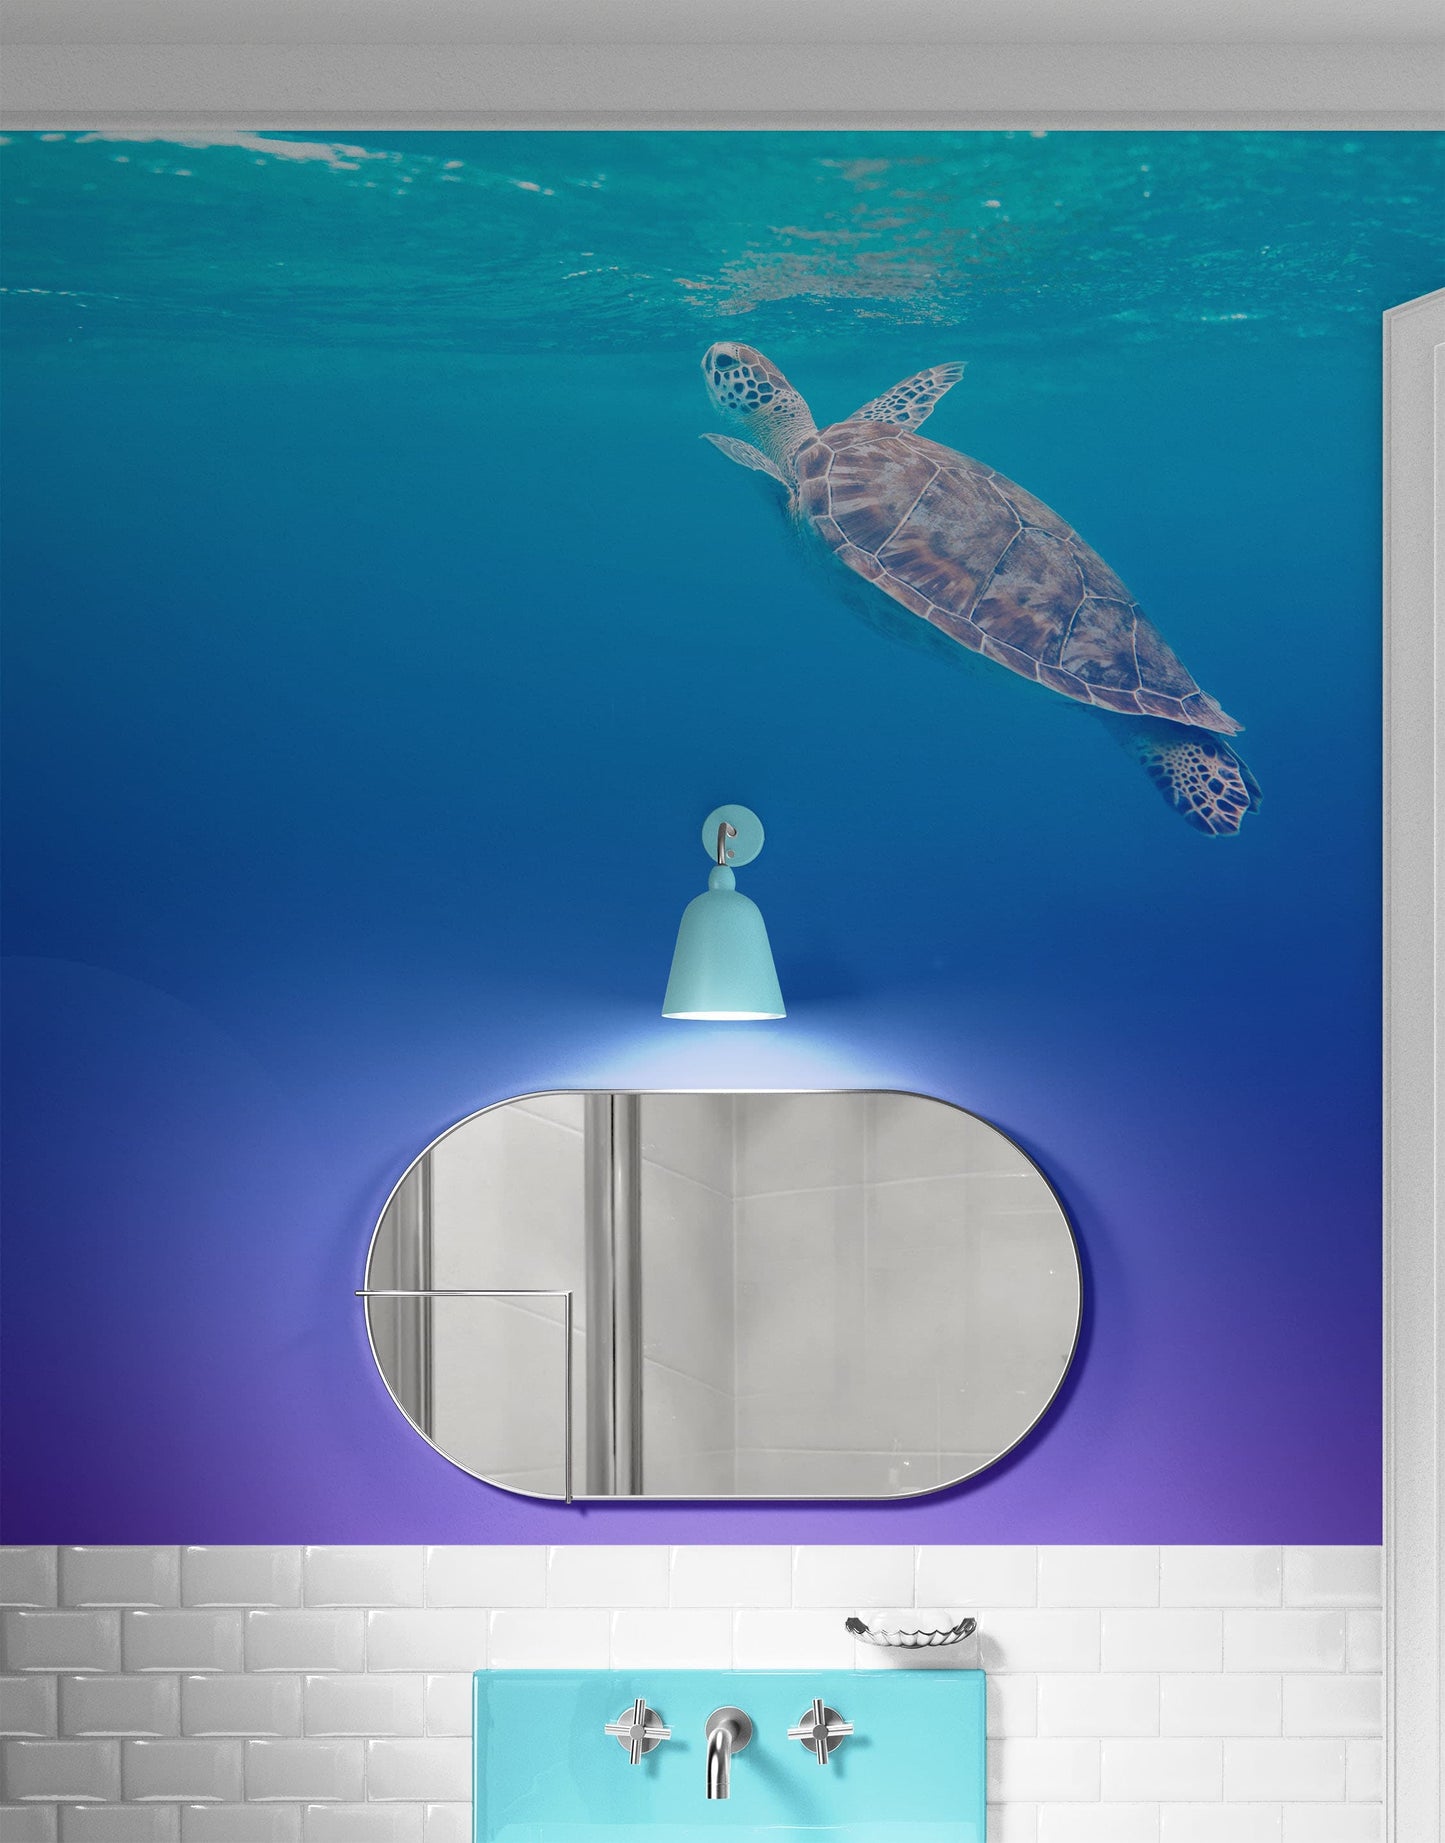 Bathroom_With_Turtle_Swimming_Wall_Decal